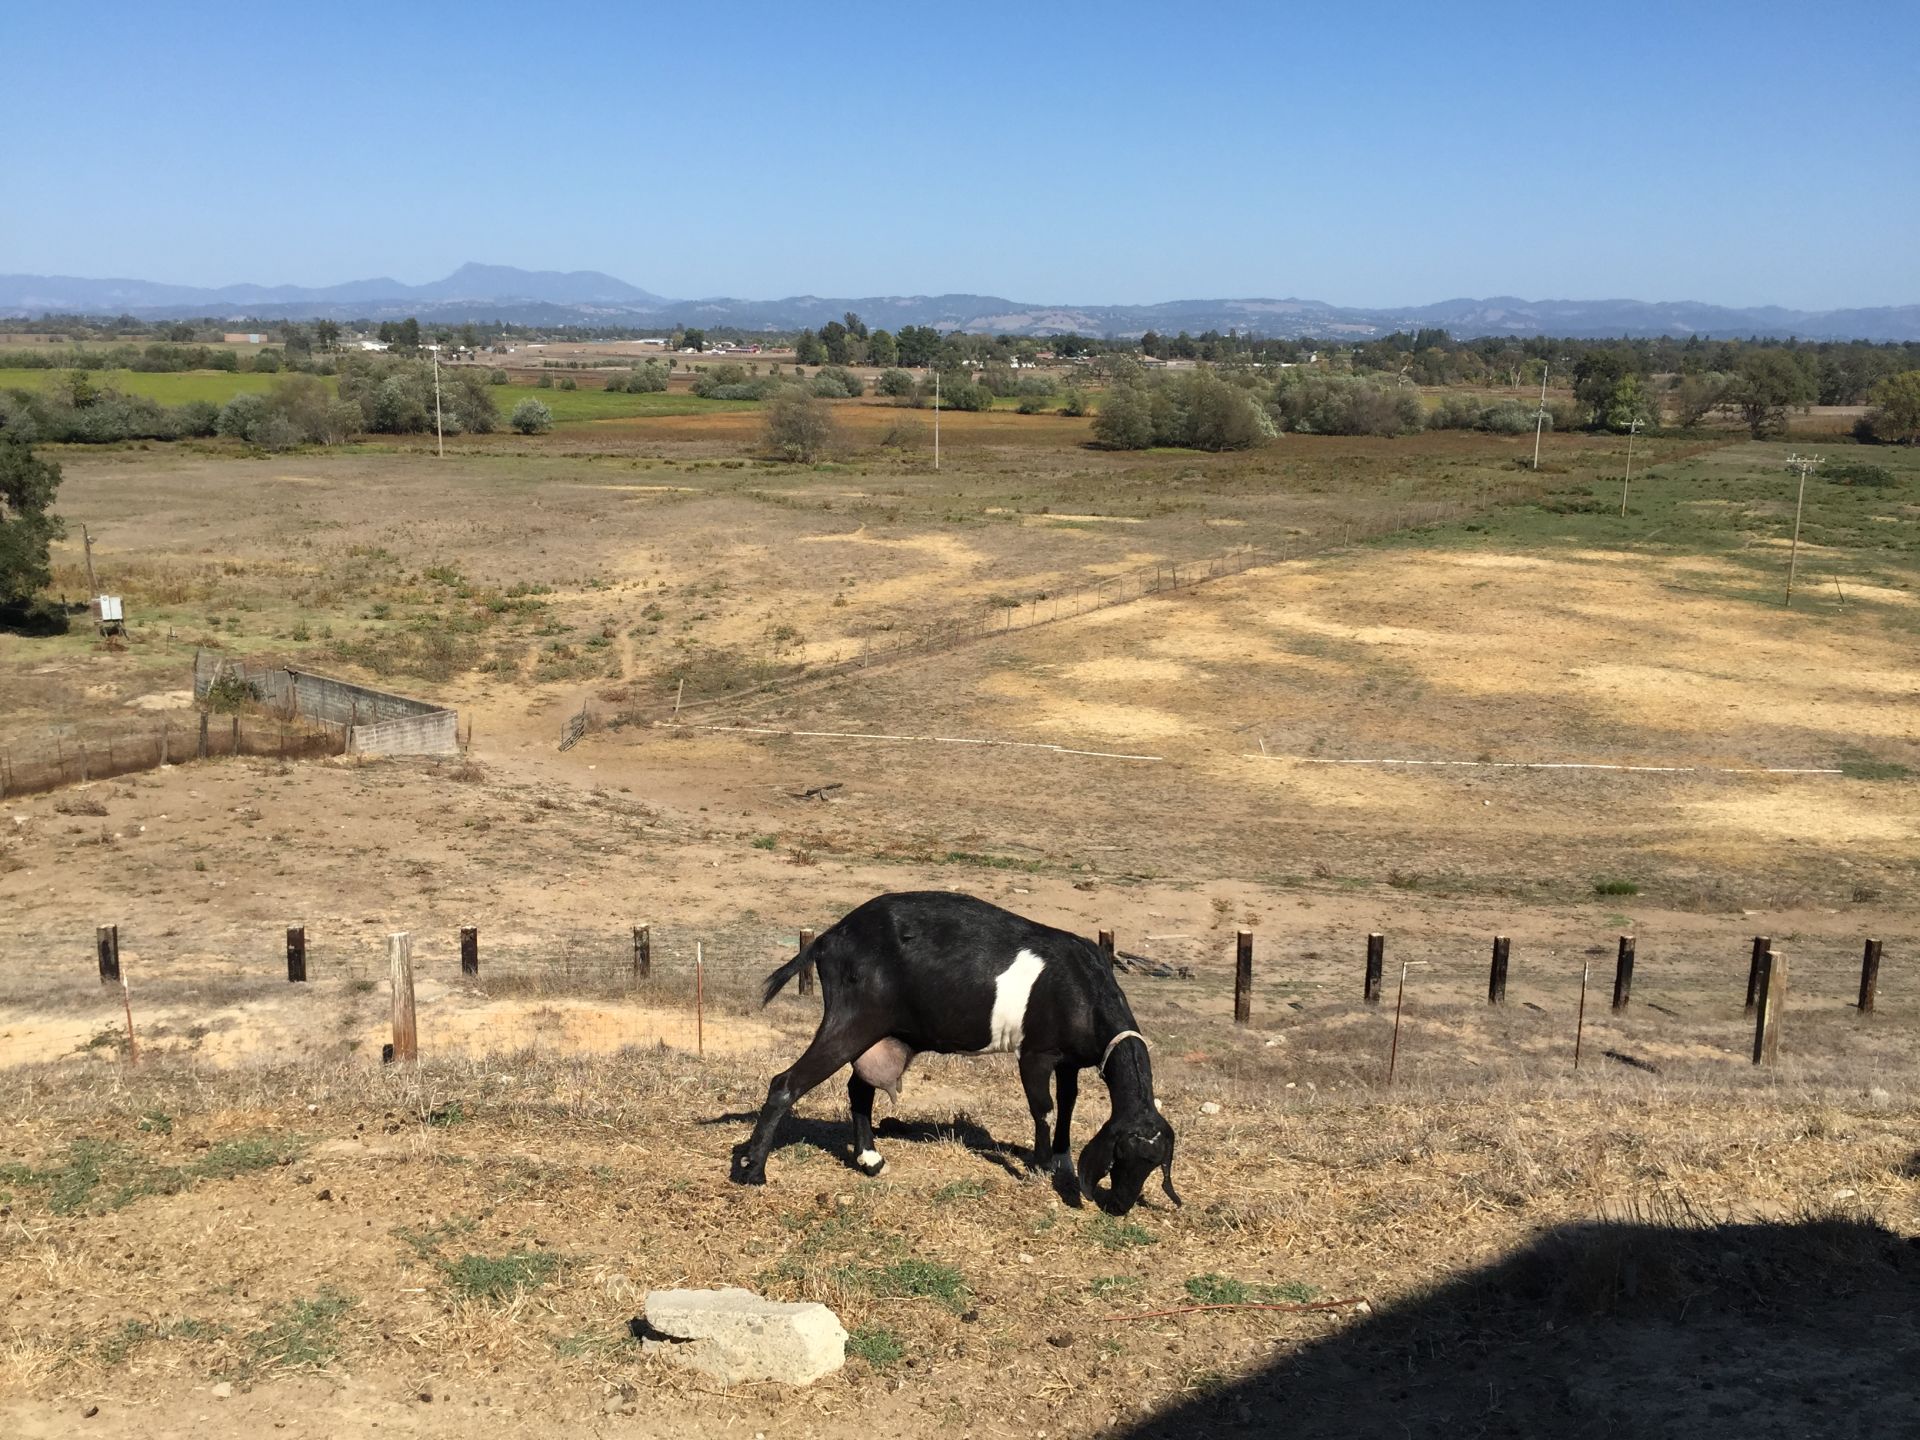 Not only does the creamery offer this view, but there are plenty of goats to play with.